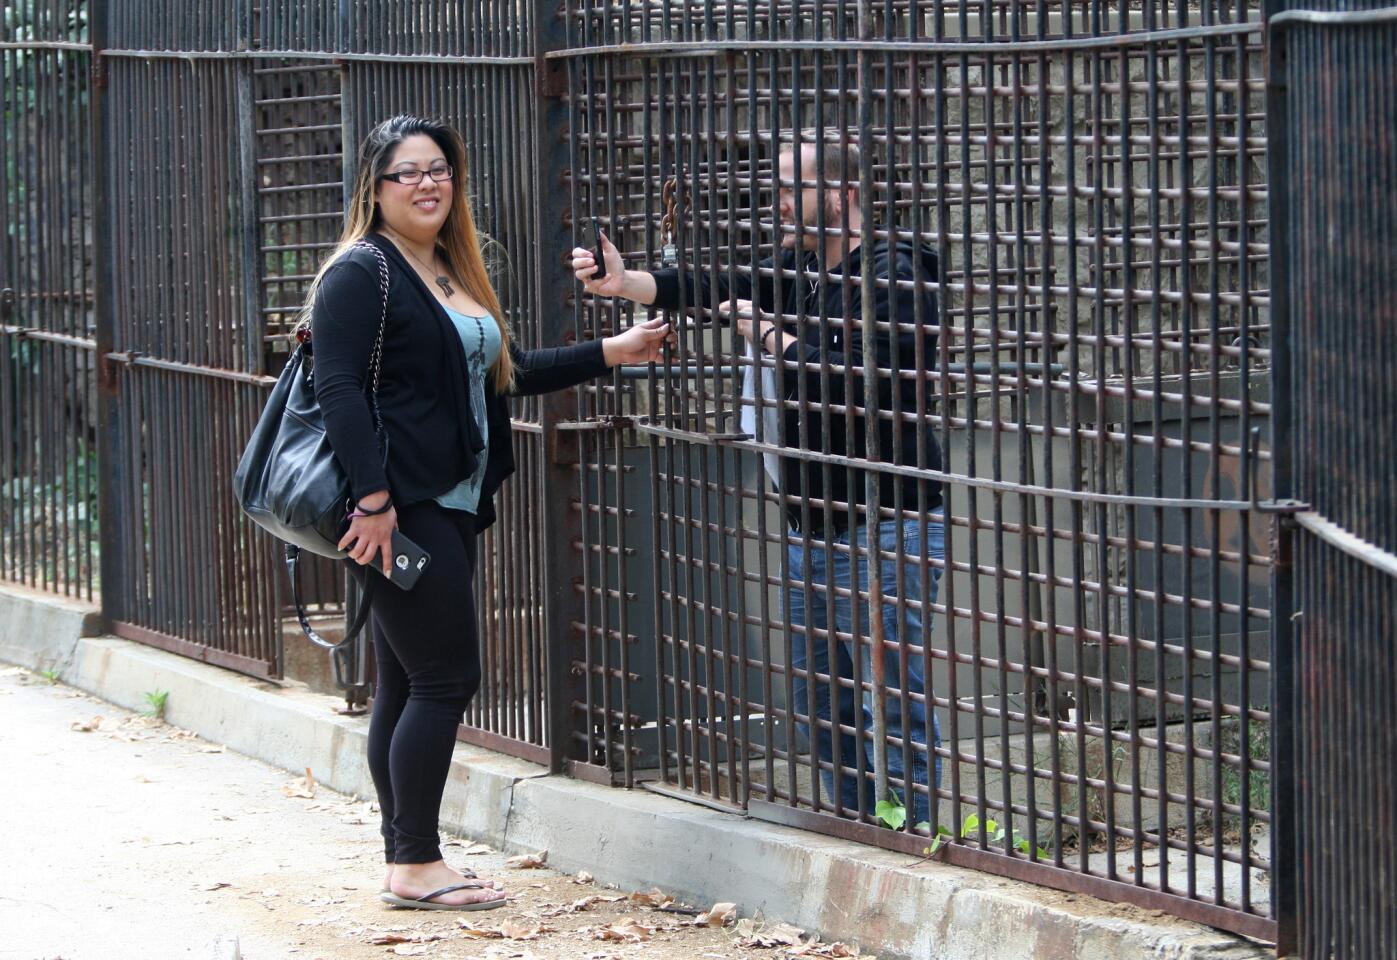 Chandra Chang of Culver City, left, and Jamie McCormick of Los Angeles have fun while visiting the old Los Angeles Zoo cages during a three-hour, Red Carpet tour offered by Burbank-based Sunnyday Scoot on Friday, June 5, 2015.